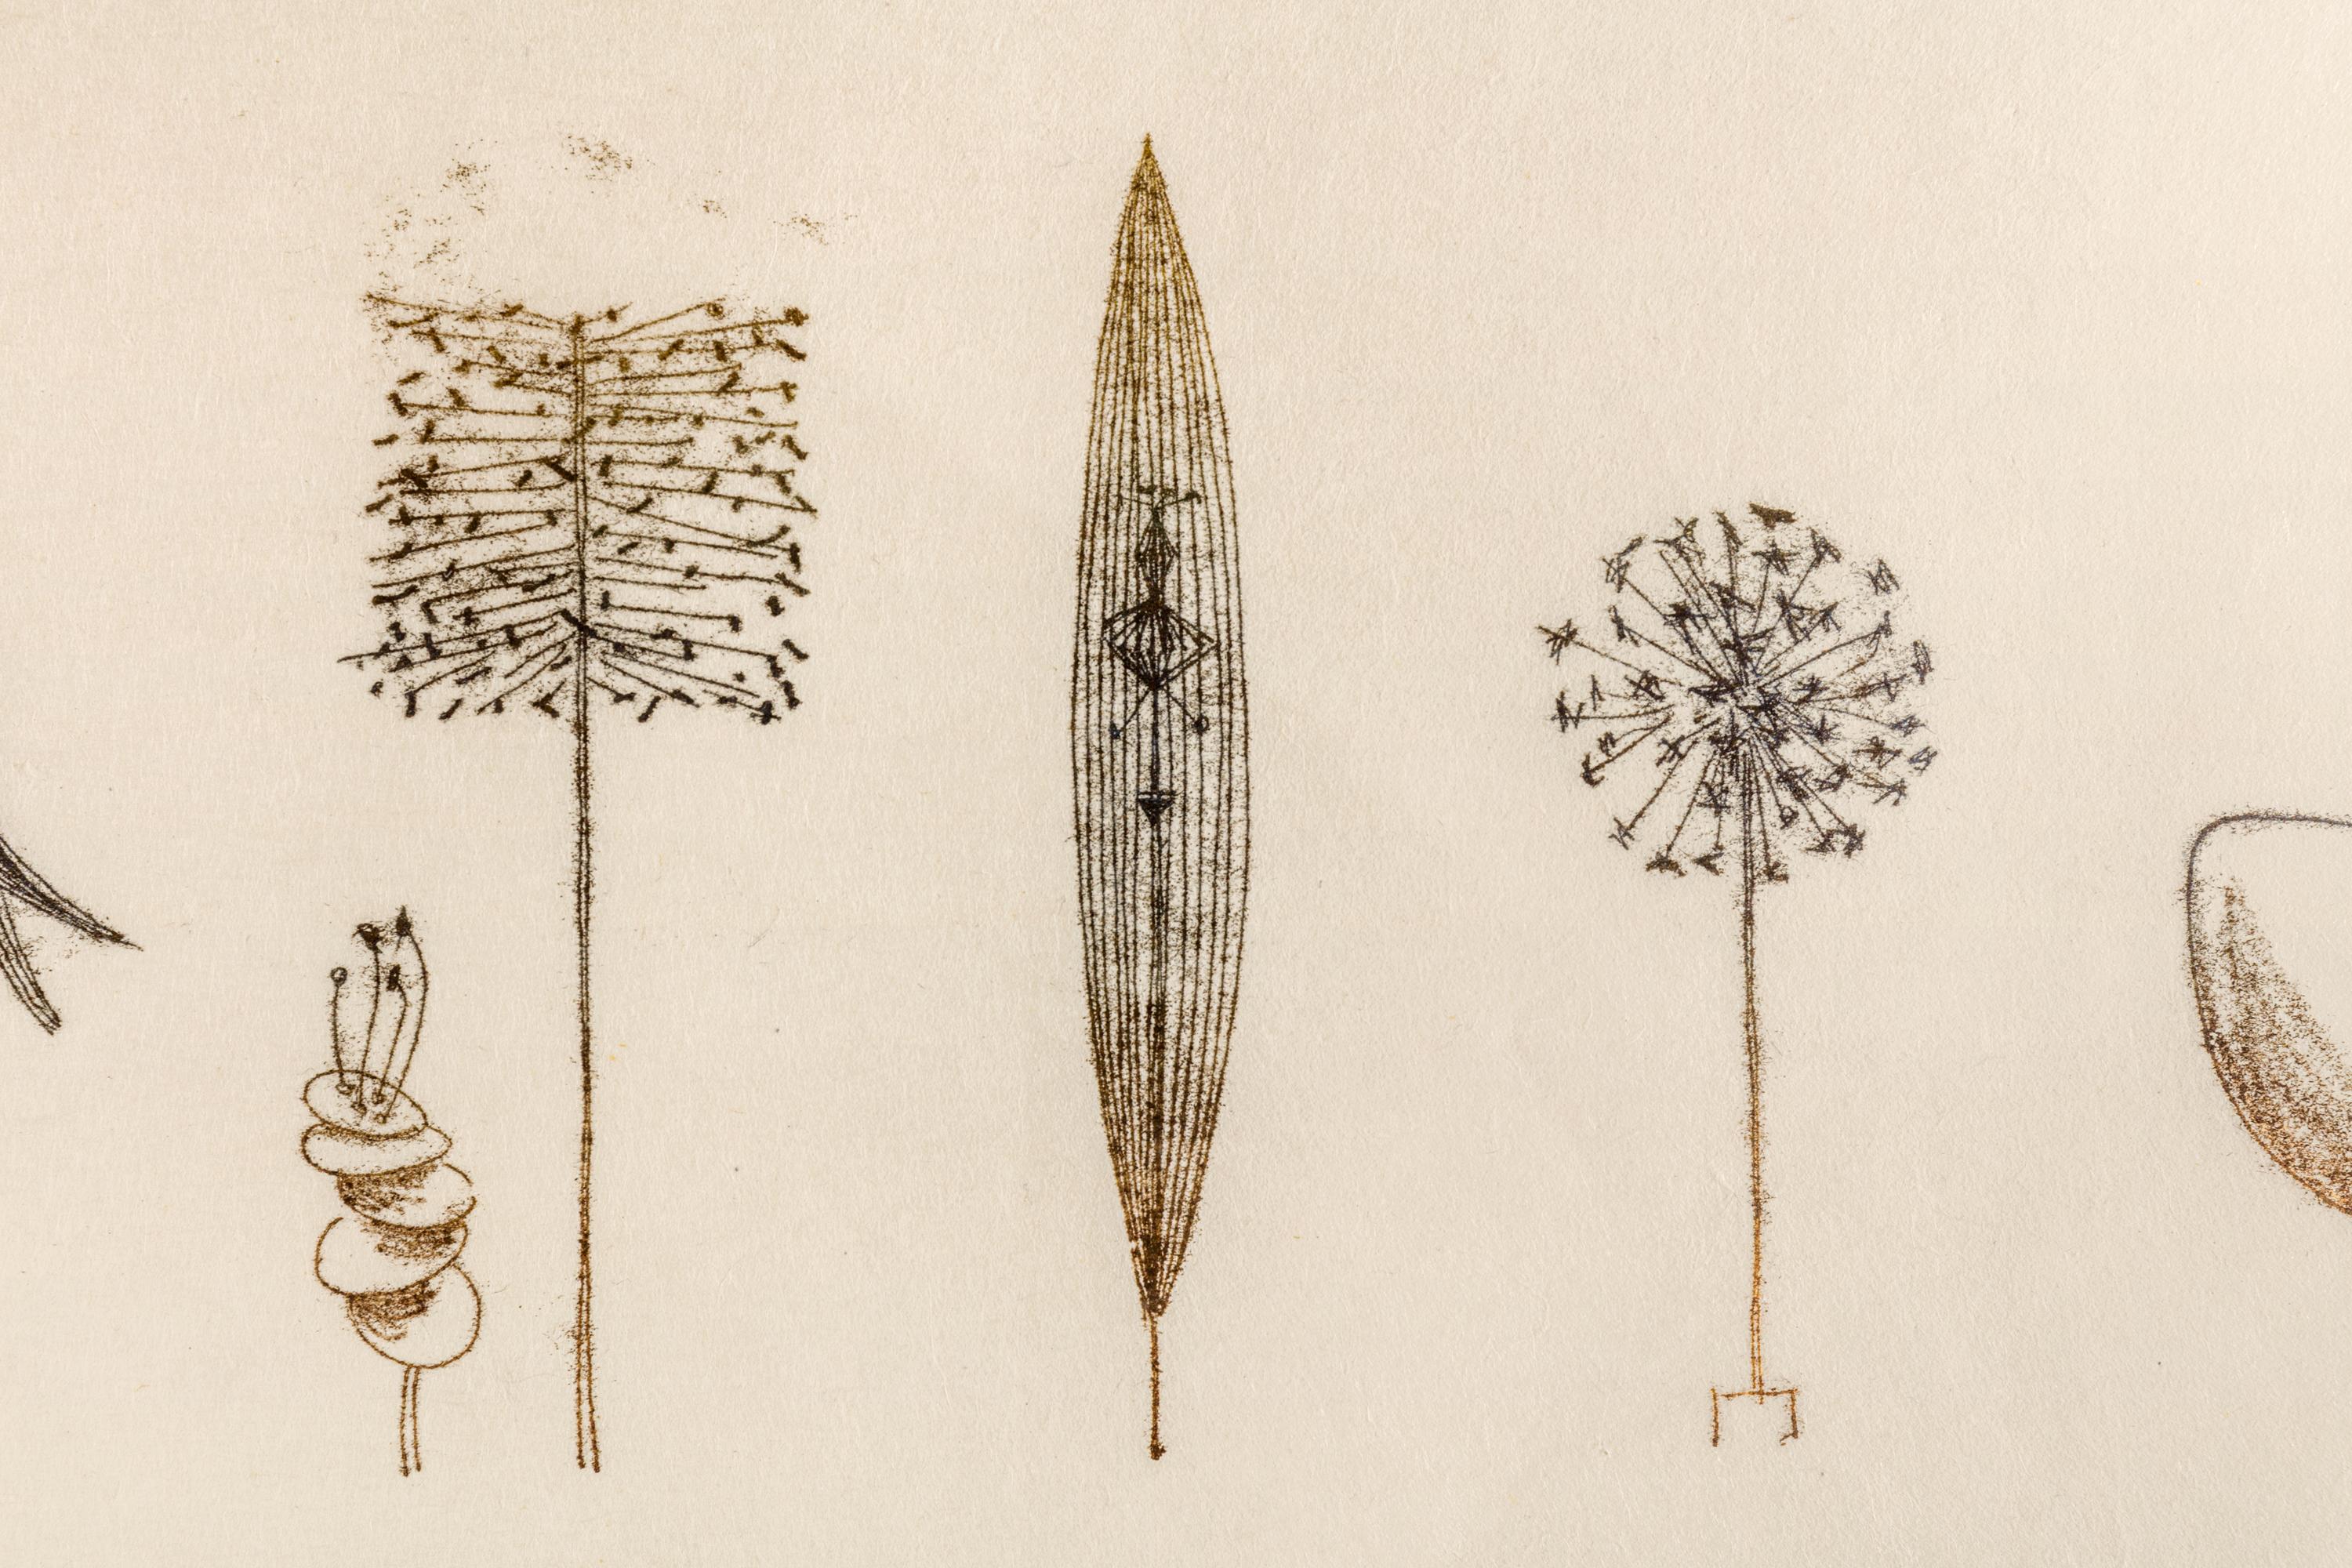 Bertoia created hundreds if not thousands of one of a kind monotypes in his career, often as working drawings for his sculpture works. He employed a variety of techniques to arrive at his unique ends, most often scribing the reverse of a paper on an